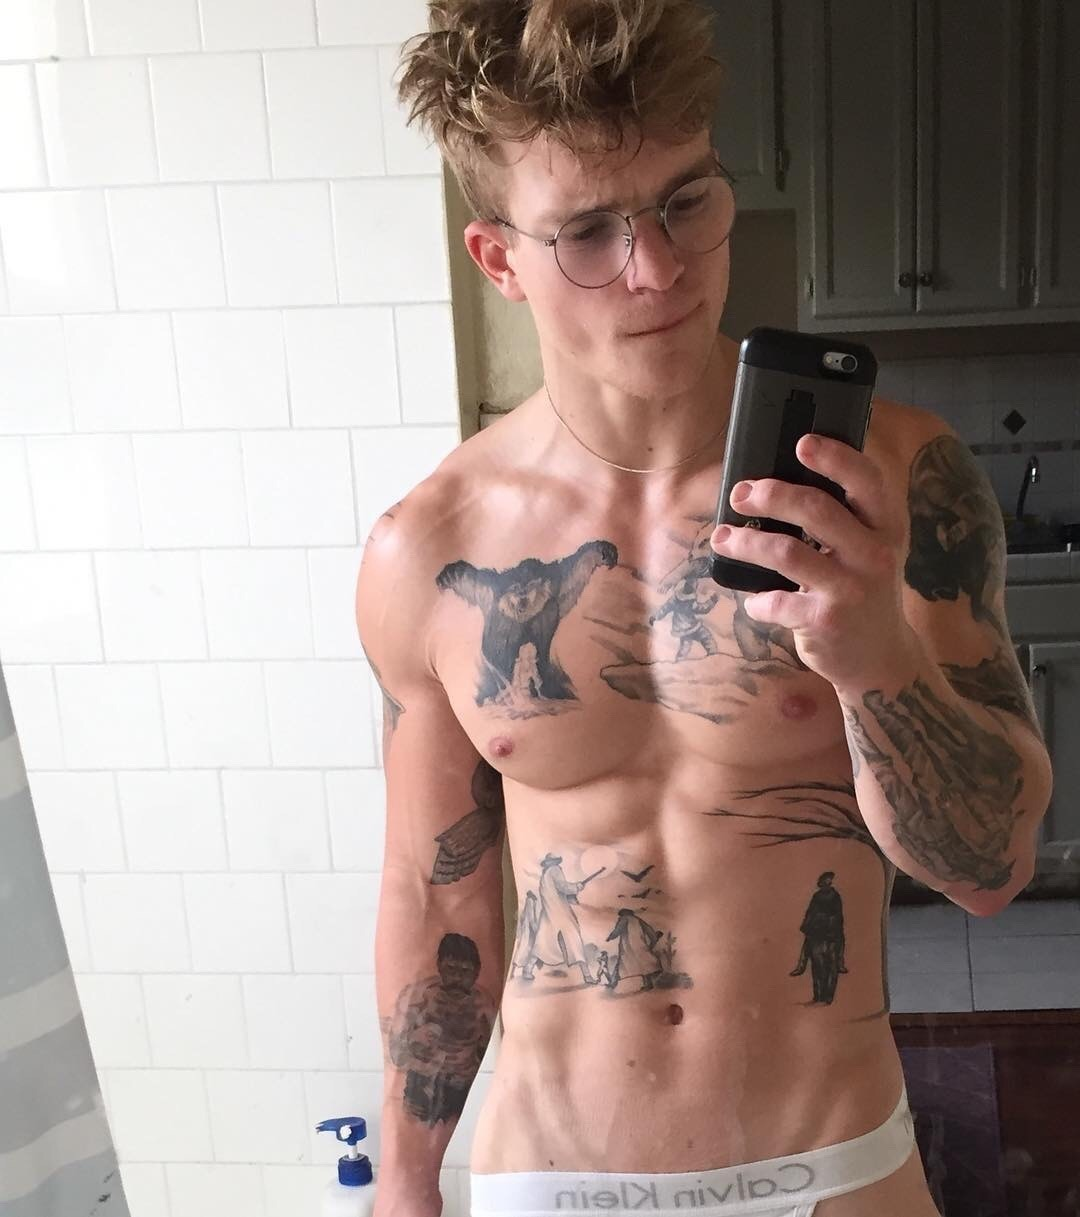 His Rustic tatts seem to tell a story. [Please HELP! with iD]